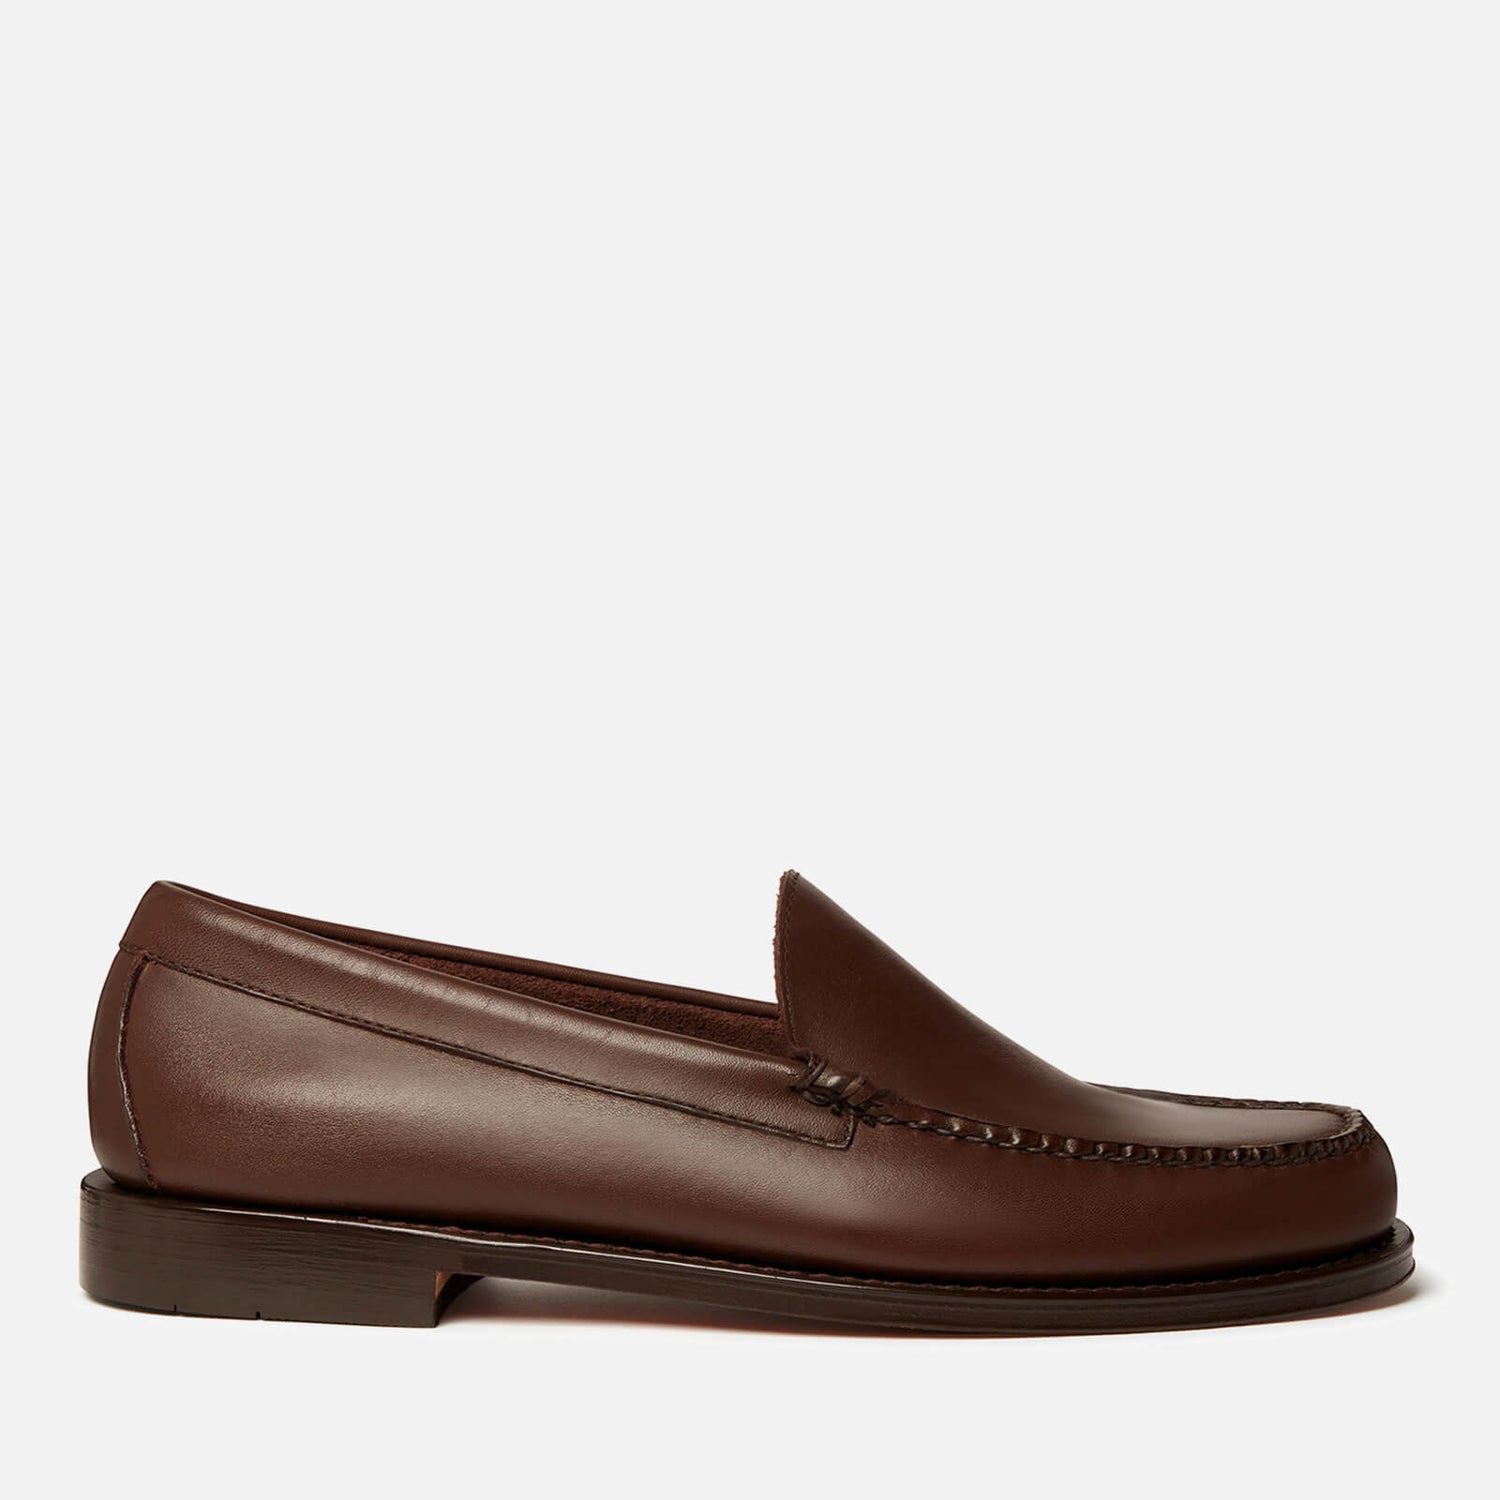 G.H Bass Men's Venetian Leather Loafers - UK 7